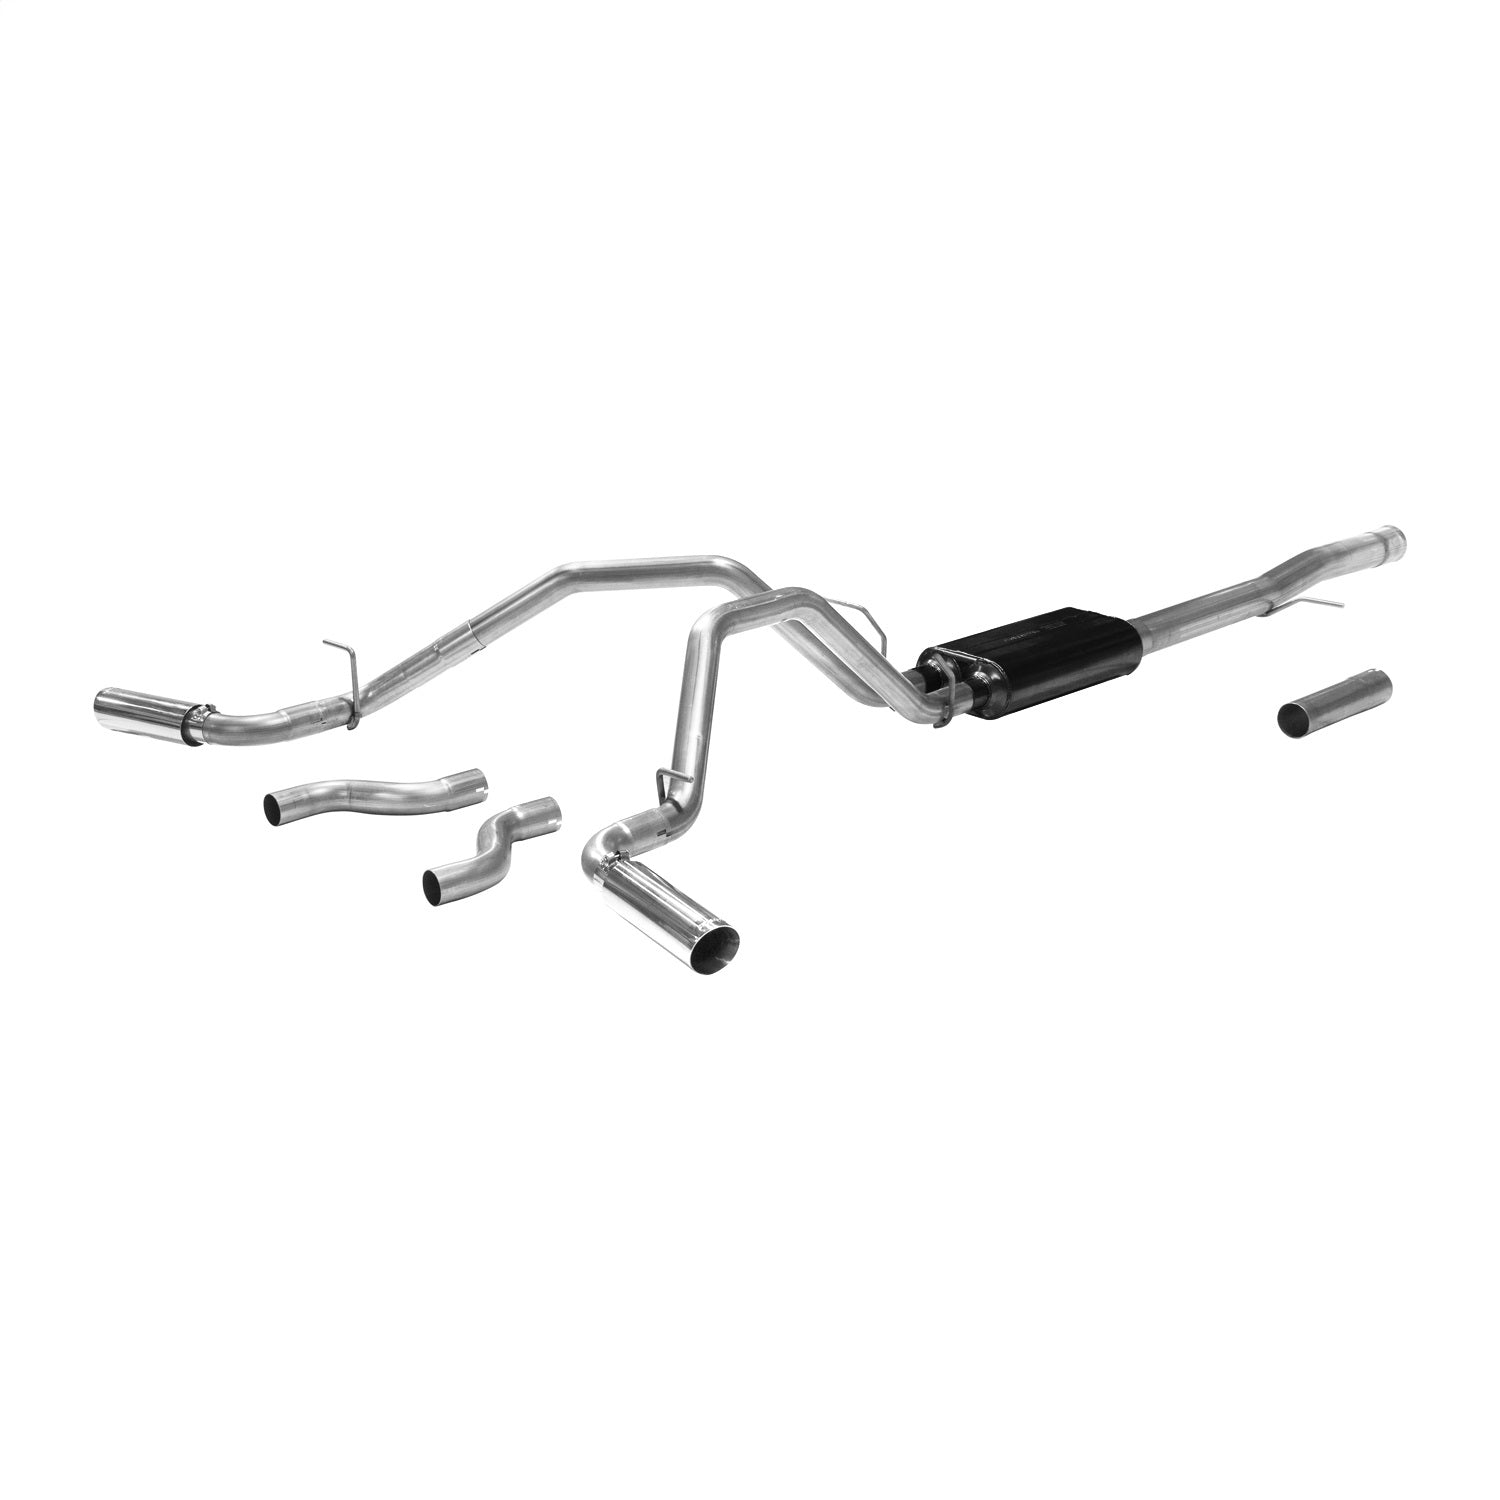 Flowmaster 817602 American Thunder Cat Back Exhaust System